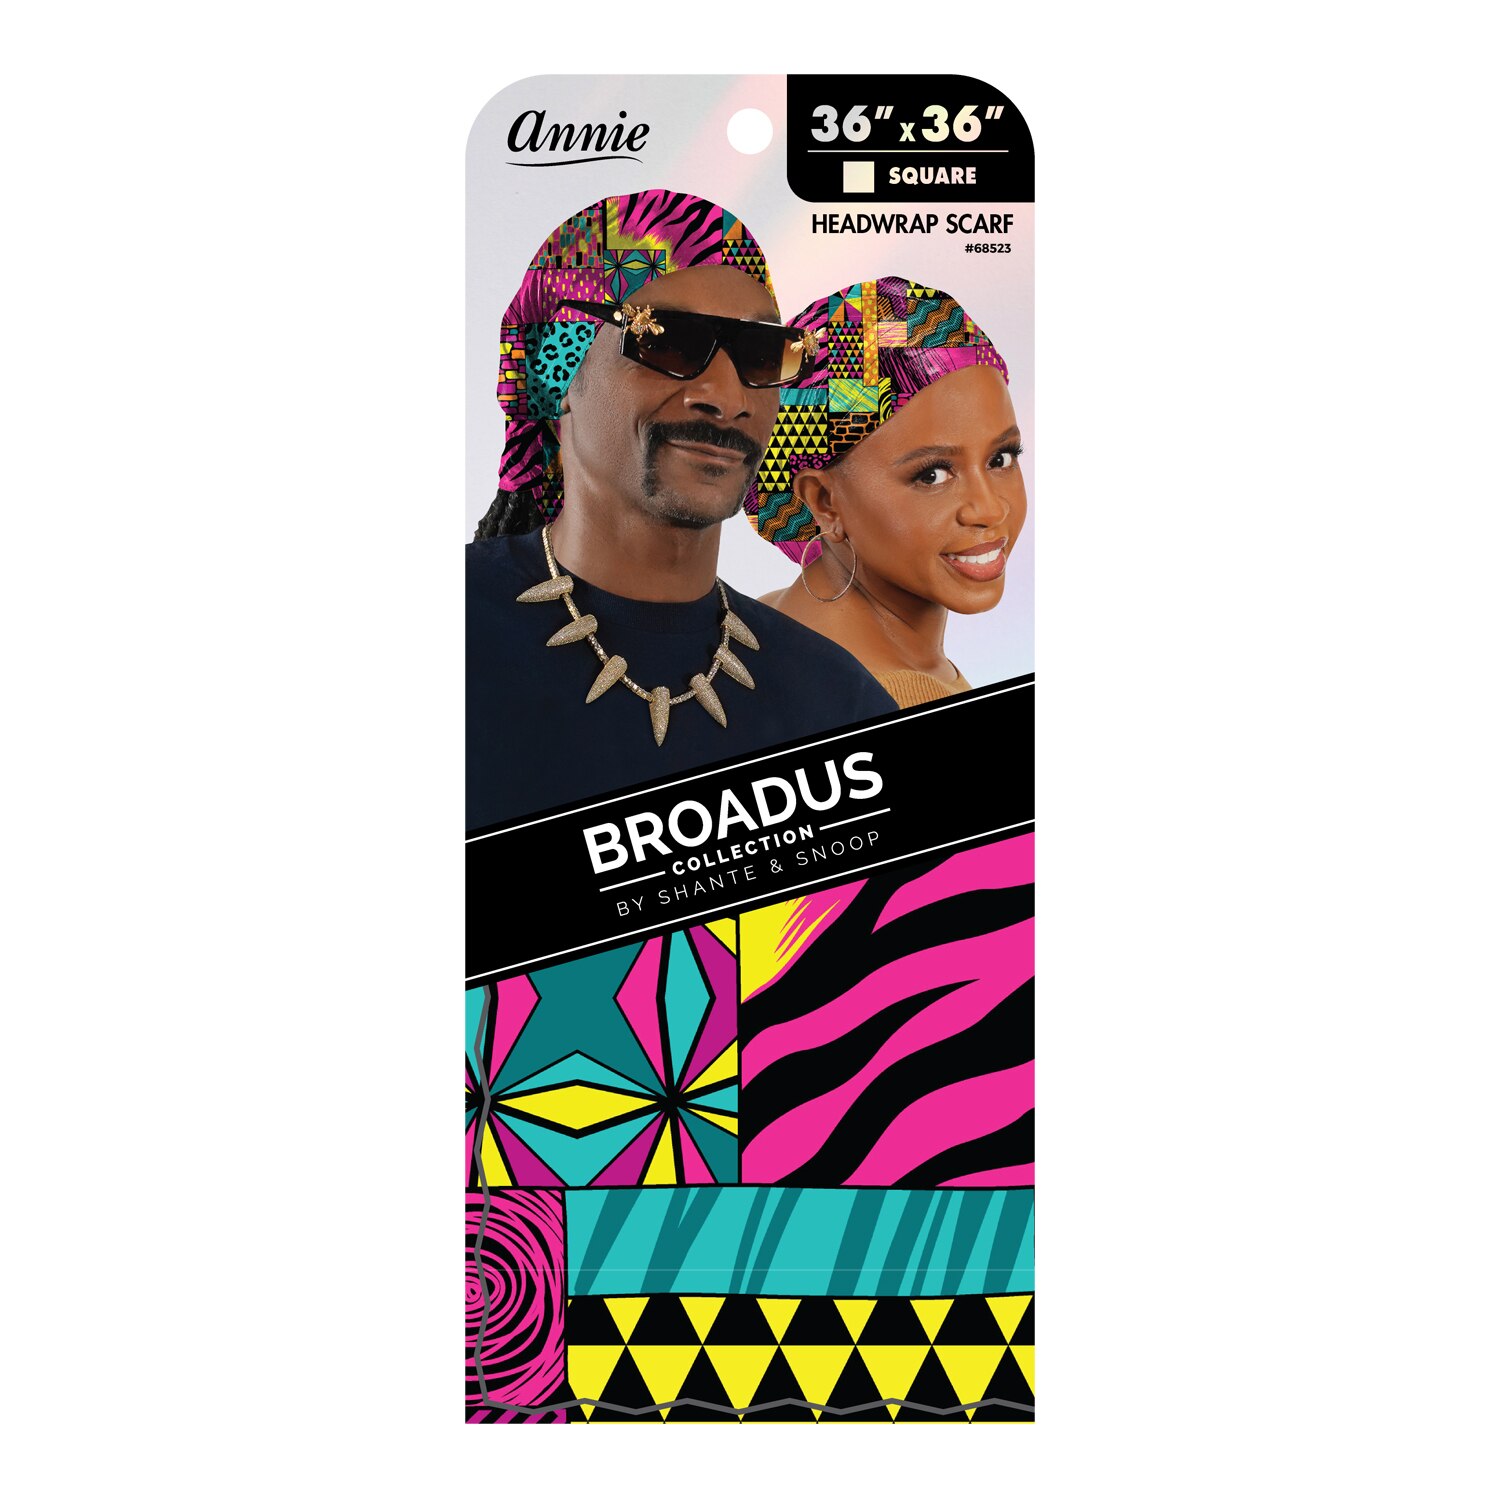 Annie Broadus Collection Headwrap Scarf, Quest, 36 In. X 36 In. , CVS